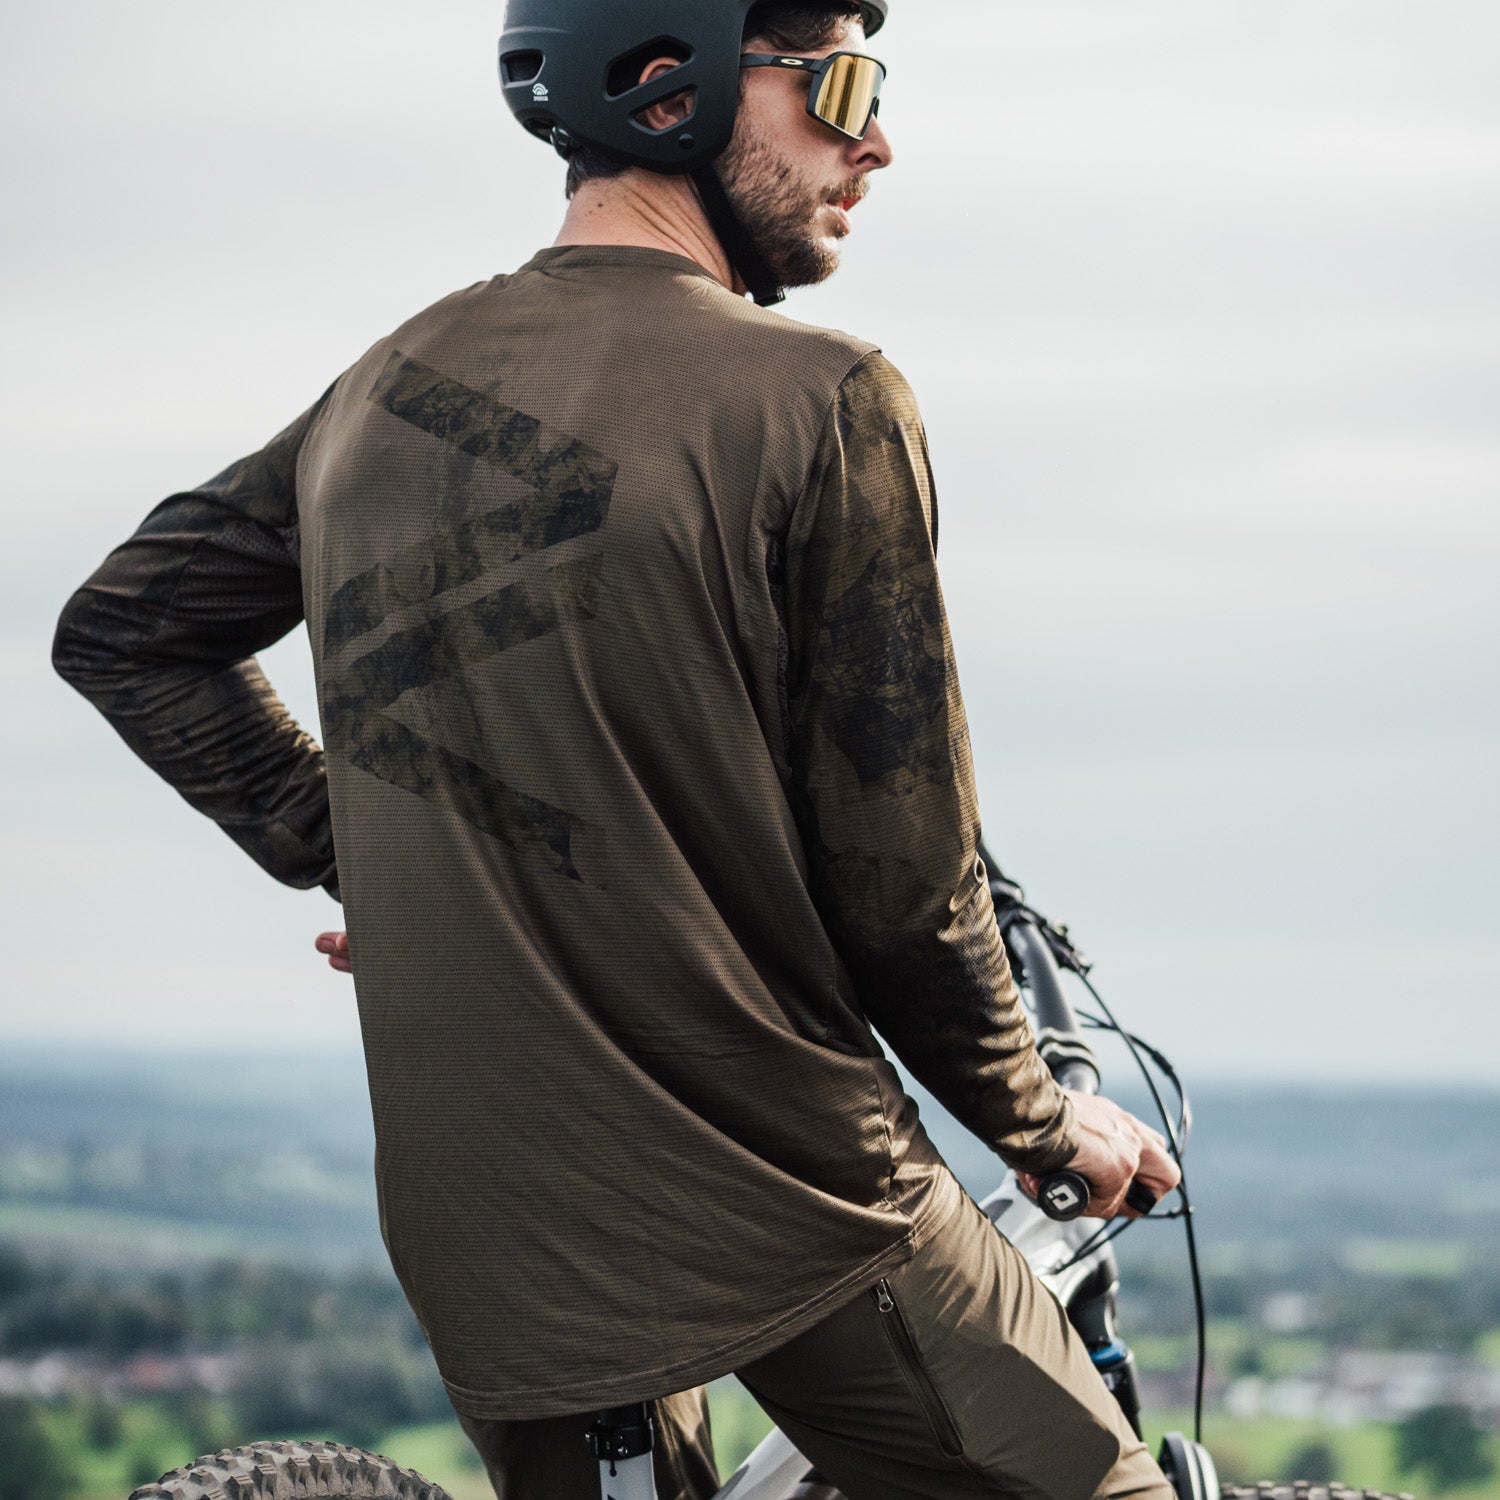 Durable and stretchy khaki long sleeve jersey for enduro and downhill mountain biking, with a sustainable design